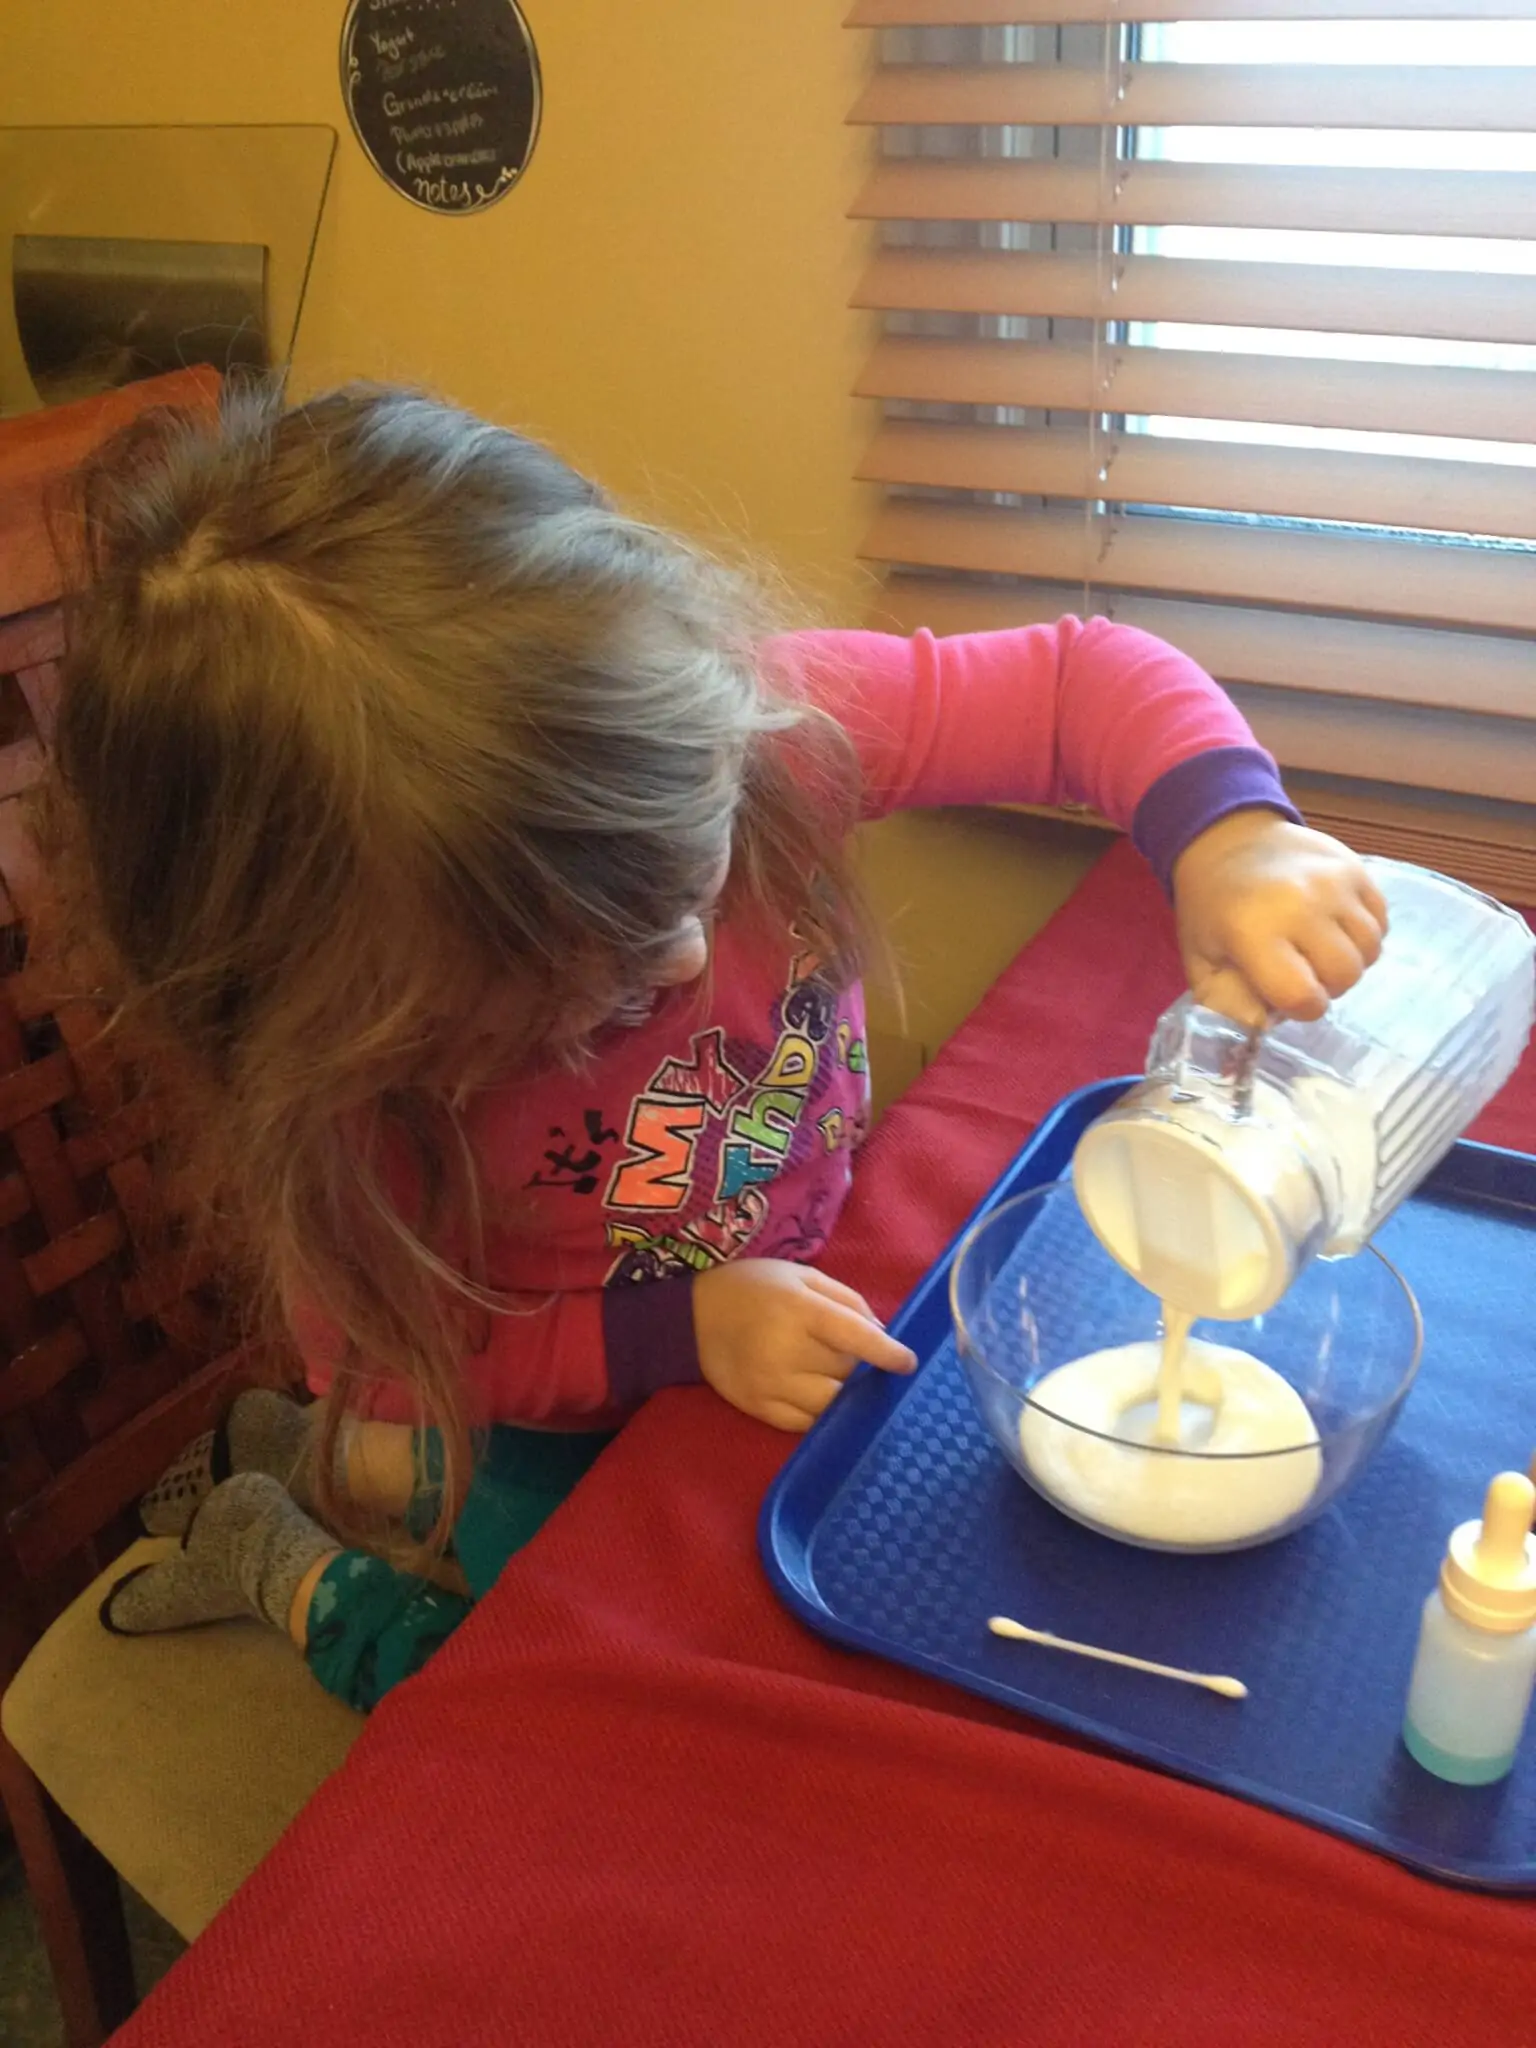 milk and dish soap experiment: pouring milk is a montessori practical life skill used in this fun science experiment